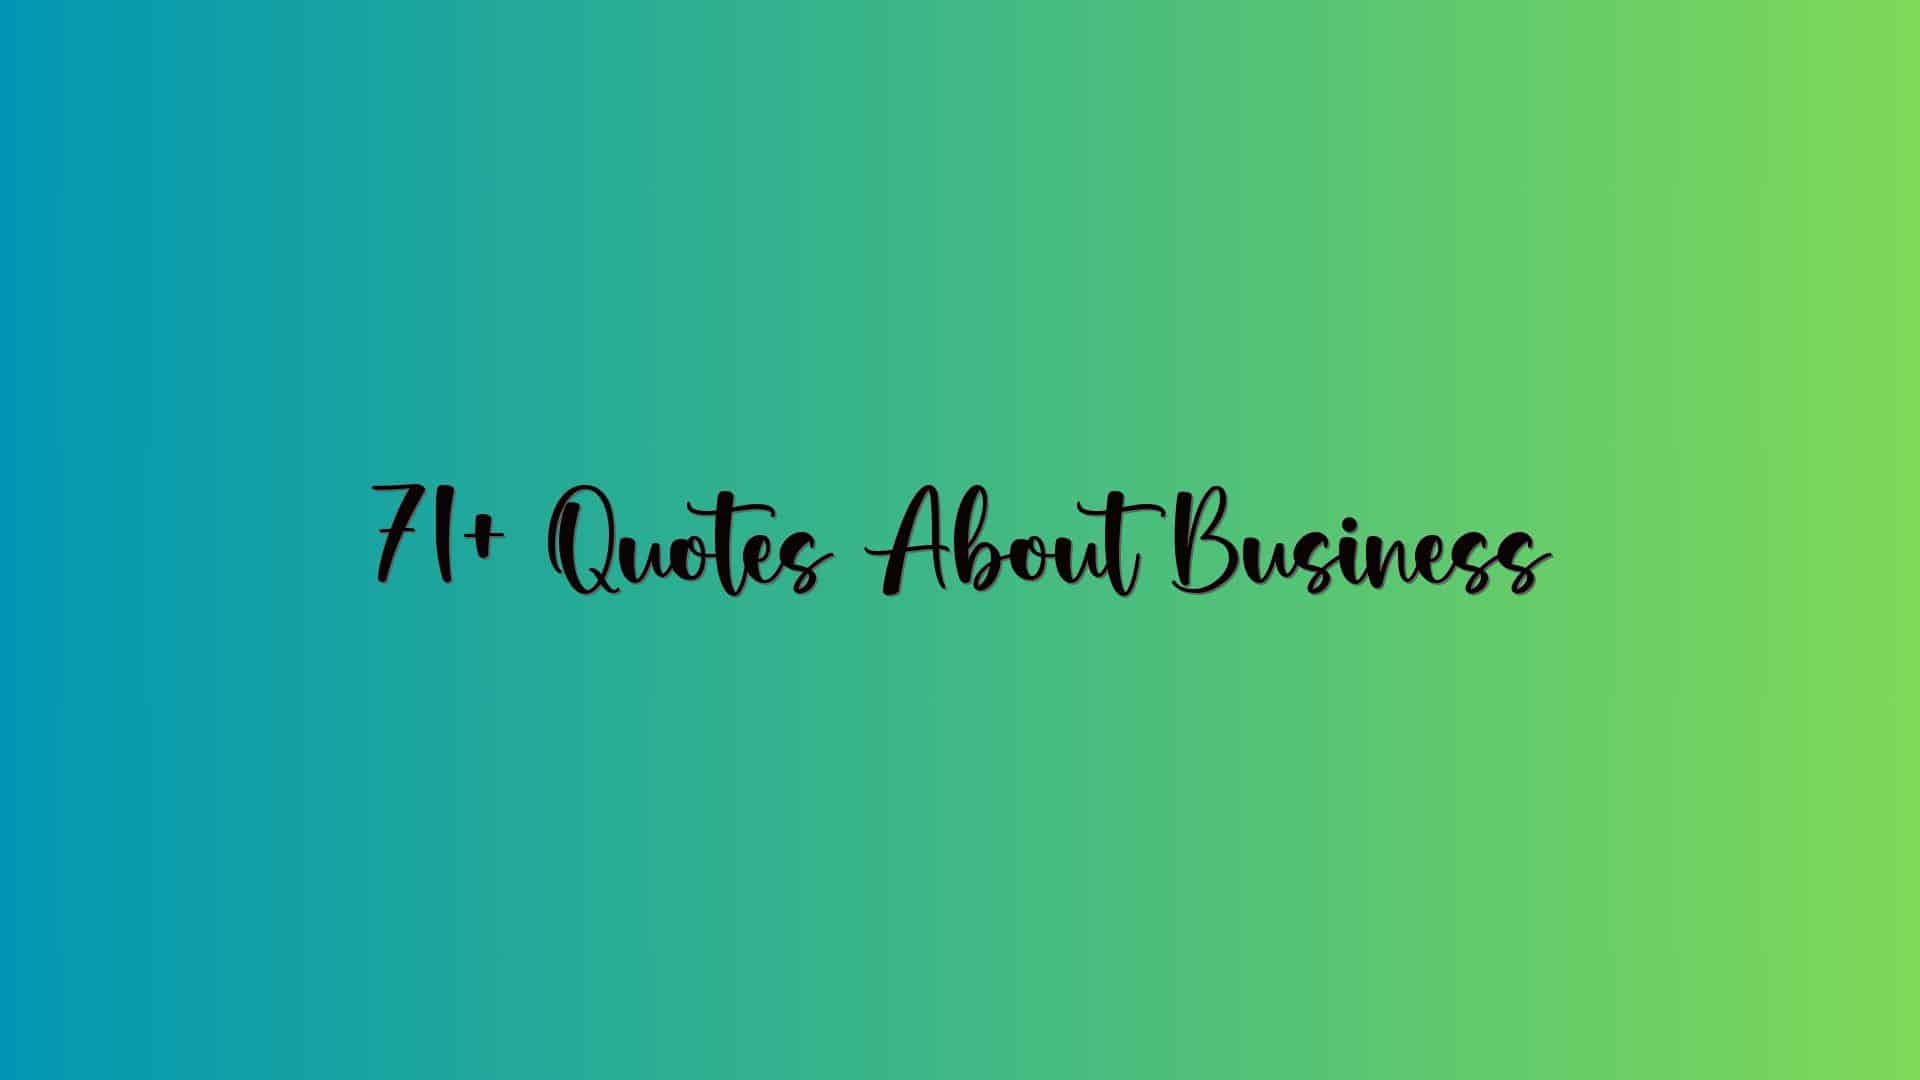 71+ Quotes About Business